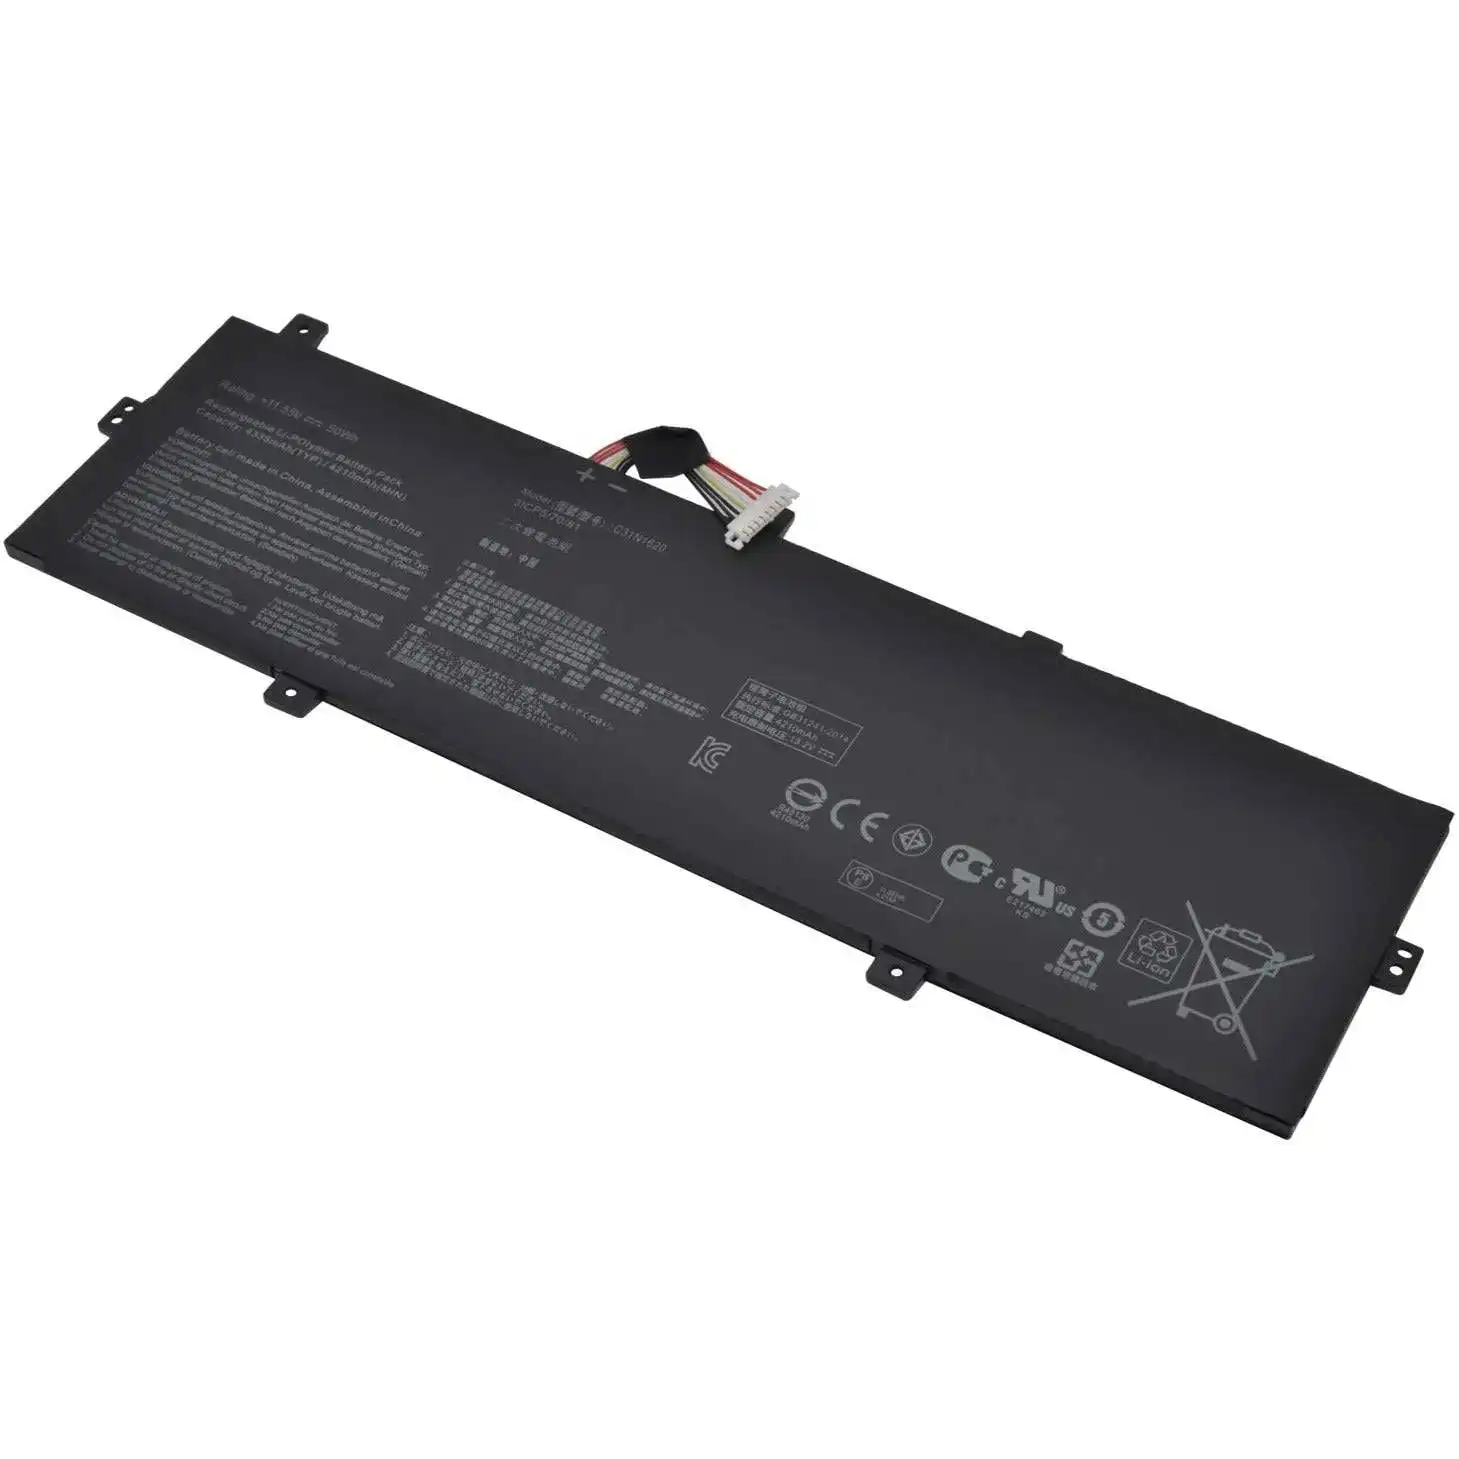 Battery for ASUS ZenBooK UX430 UX430UQ PU404 C31N1620 50Wh